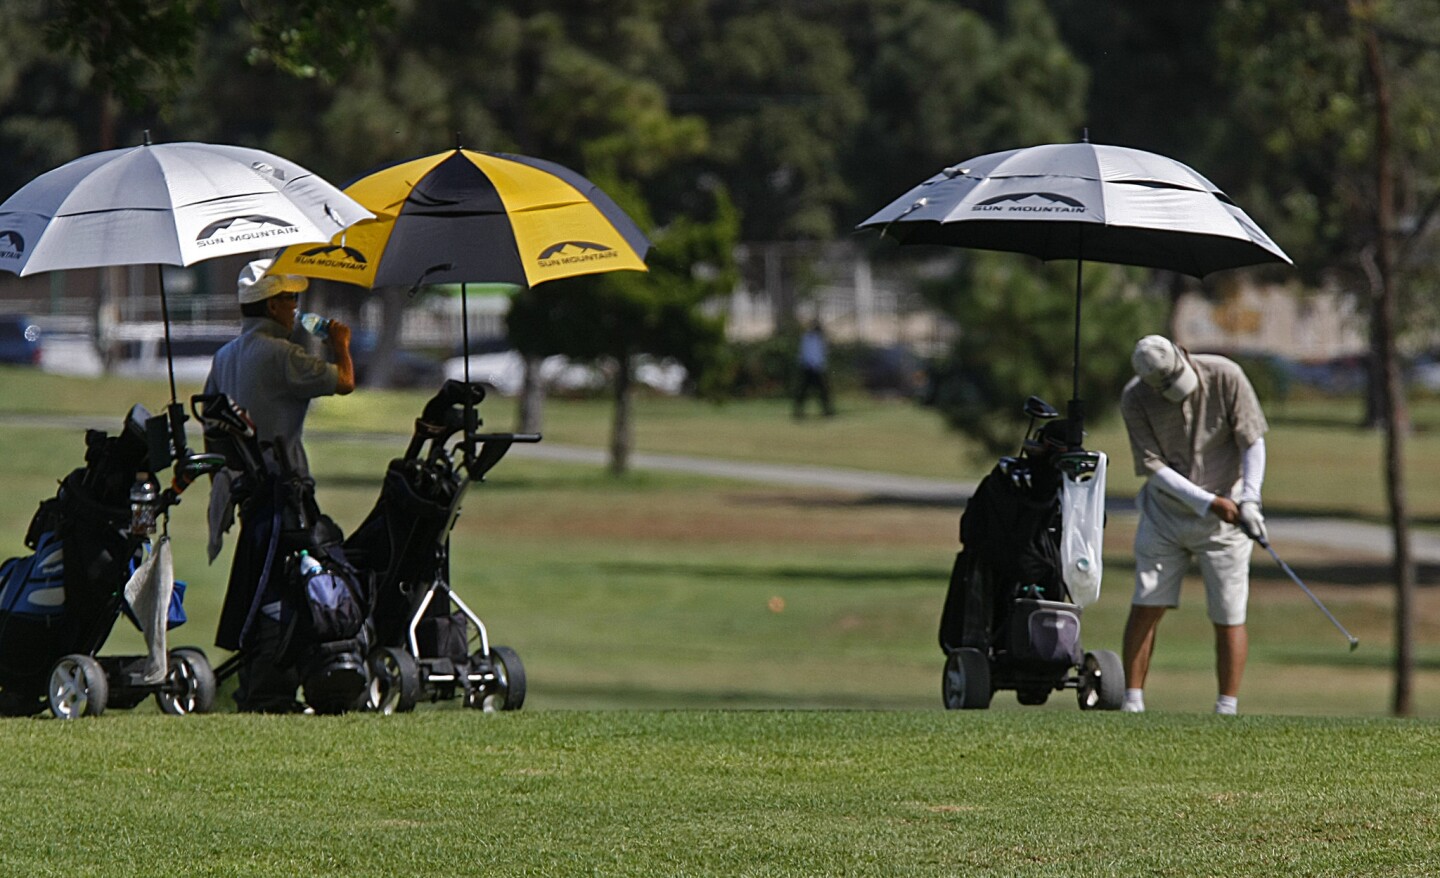 With early afternoon temperature in the mid-90s, golfers at Chester Washington Golf Course in Hawthorne carry umbrellas and ice water to beat the heat.